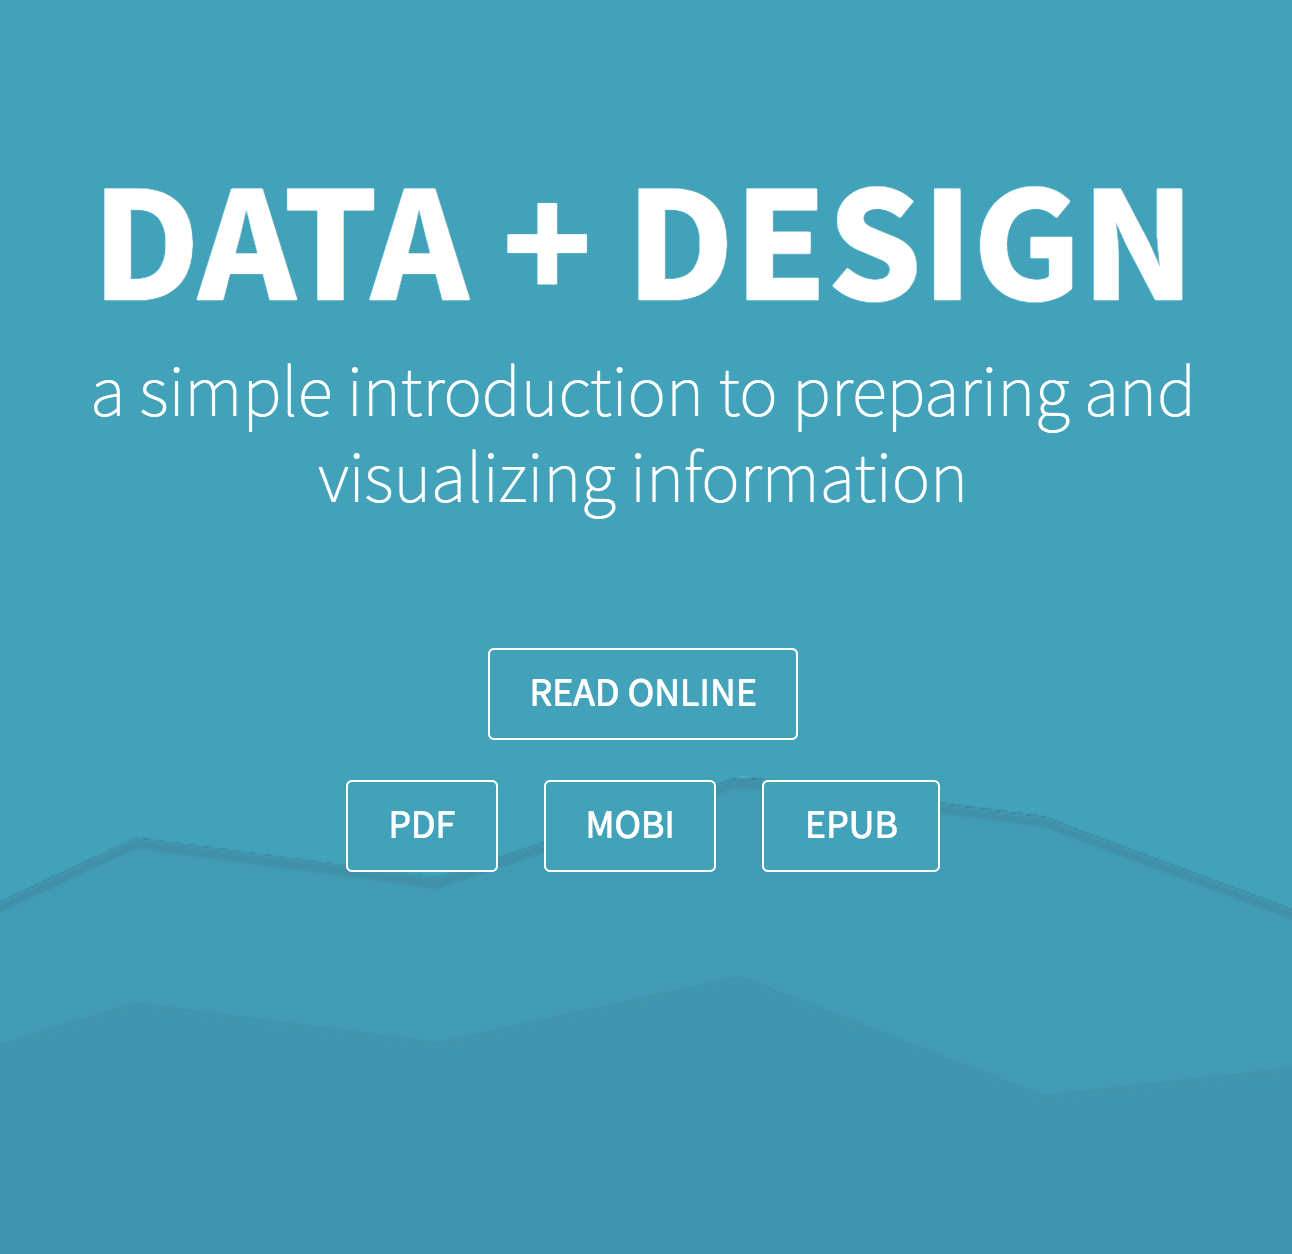 Data+Design: A simple introduction to preparing and visualizing information